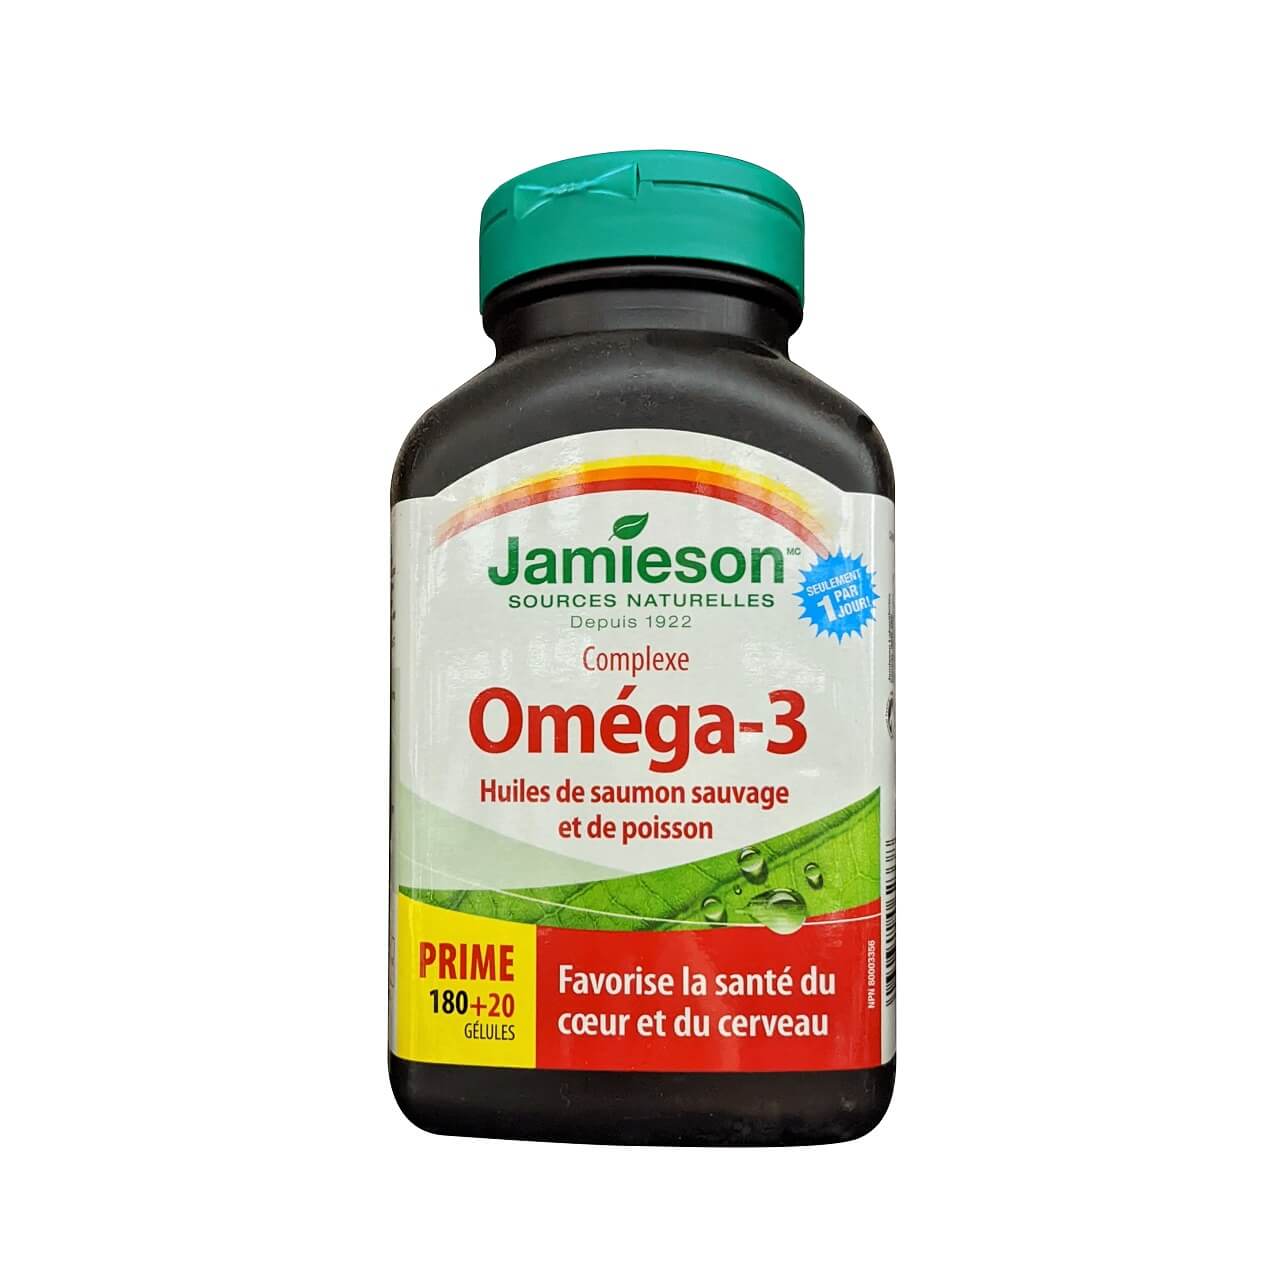 Product label for Jamieson Wild Salmon and Fish Oil Omega-3 Complex (200 softgels) in French